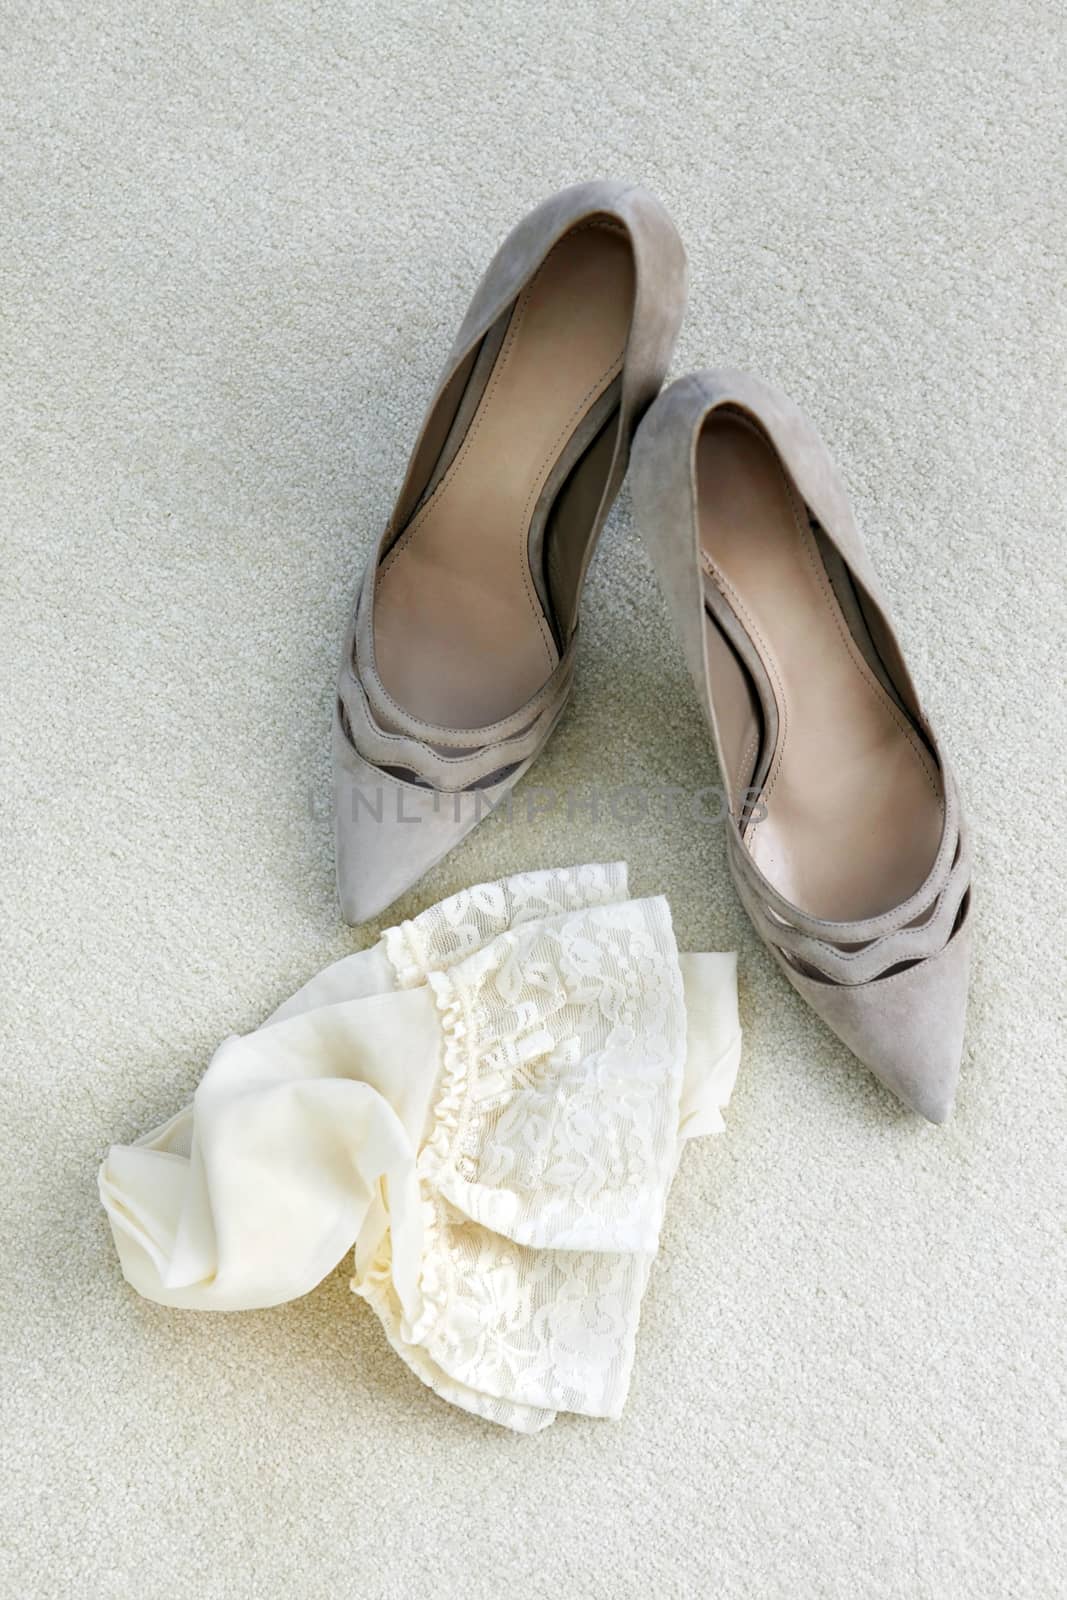 Fashion wedding shoes for the bride close-up